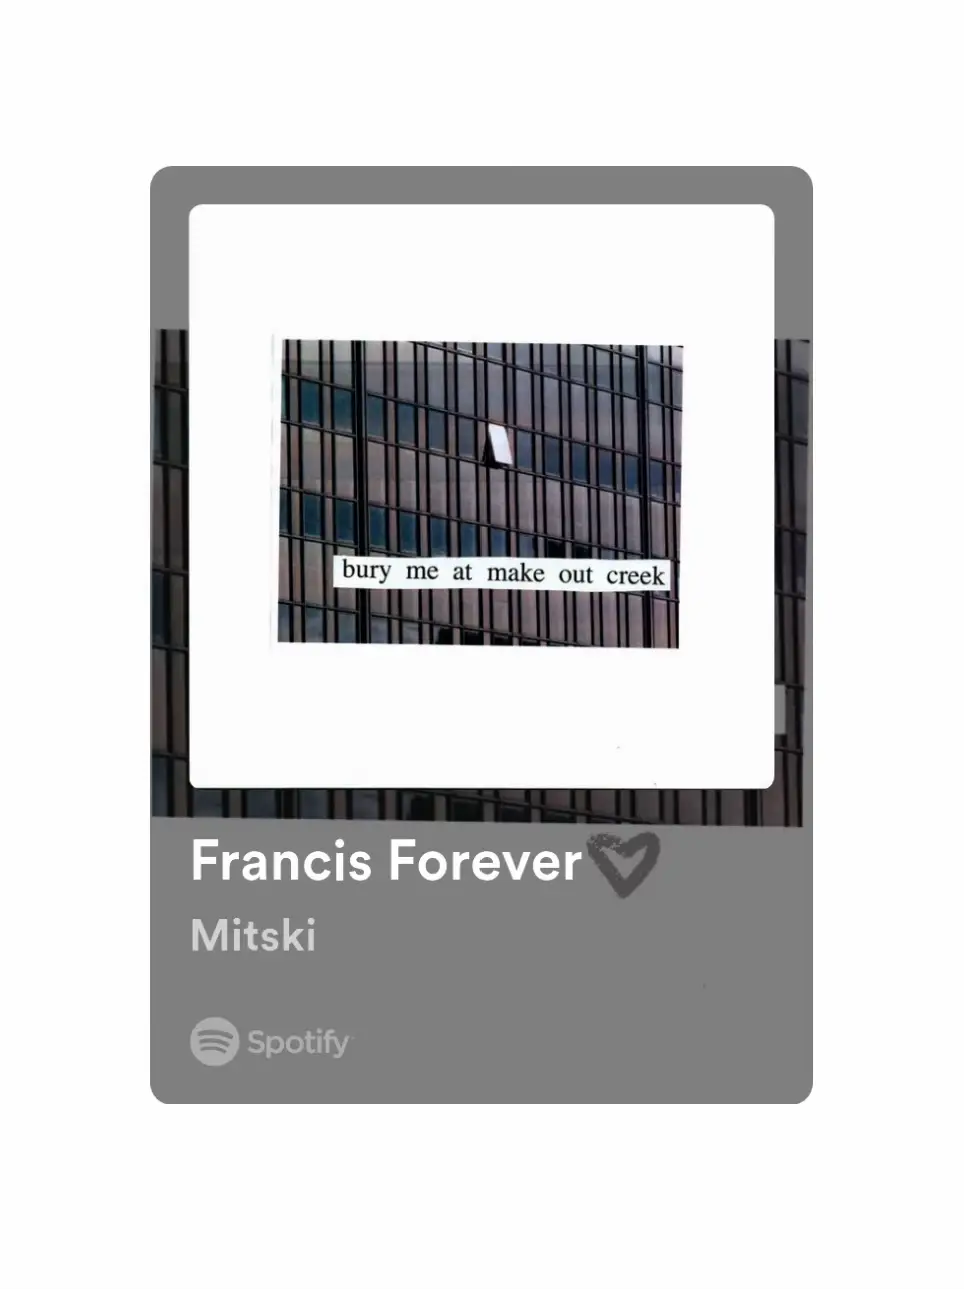  A Spotify playlist with the song "Bury Me at Make Out Creek" by Francis.